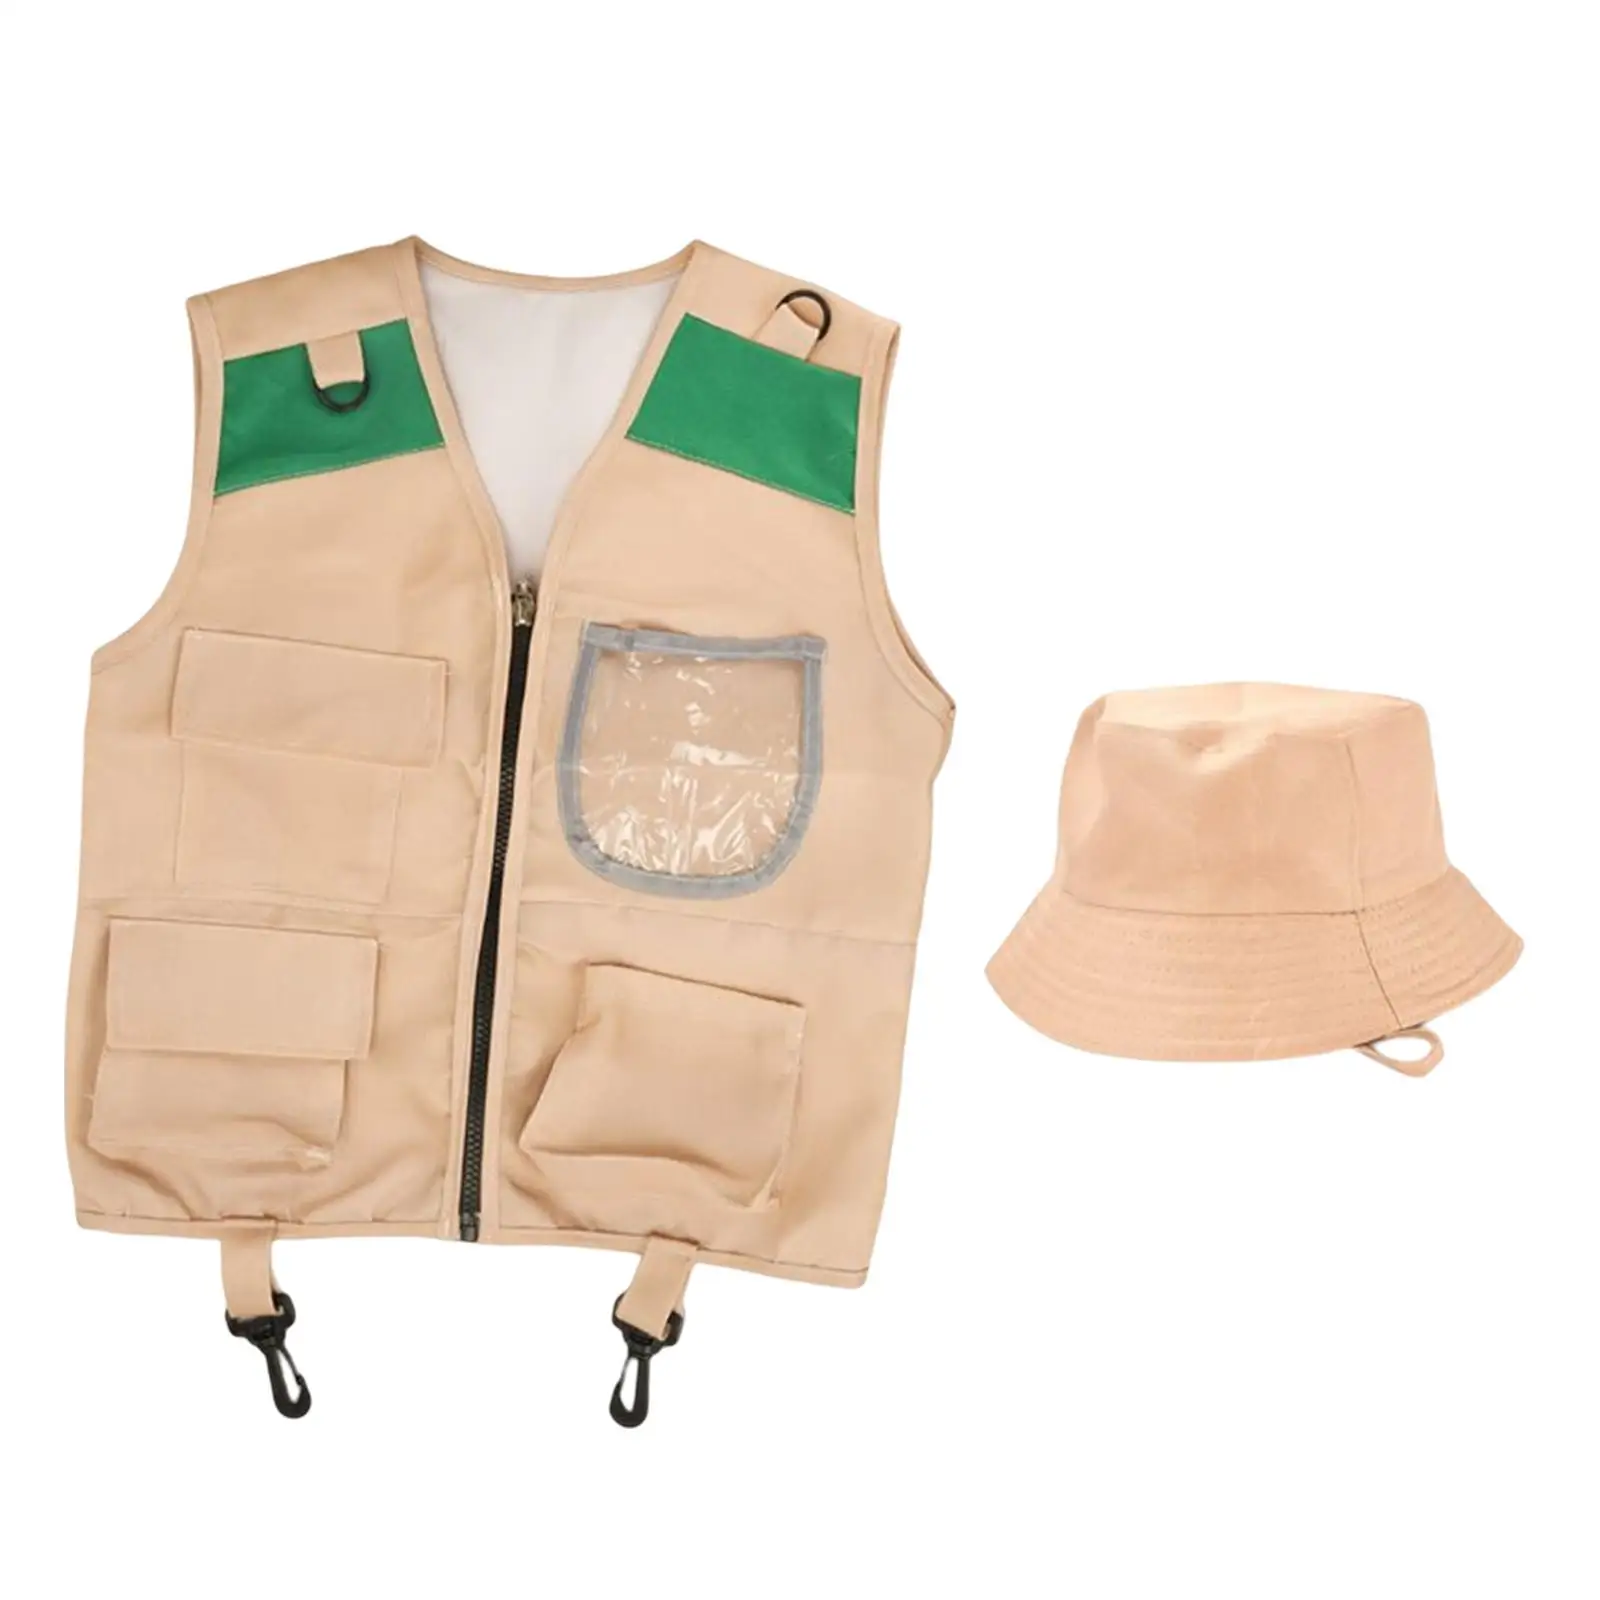 Kids Costume Vest Hat ,Party Favors ,Camping adventure Costumes, with Pockets, Kids Explorer Costume for Role Play